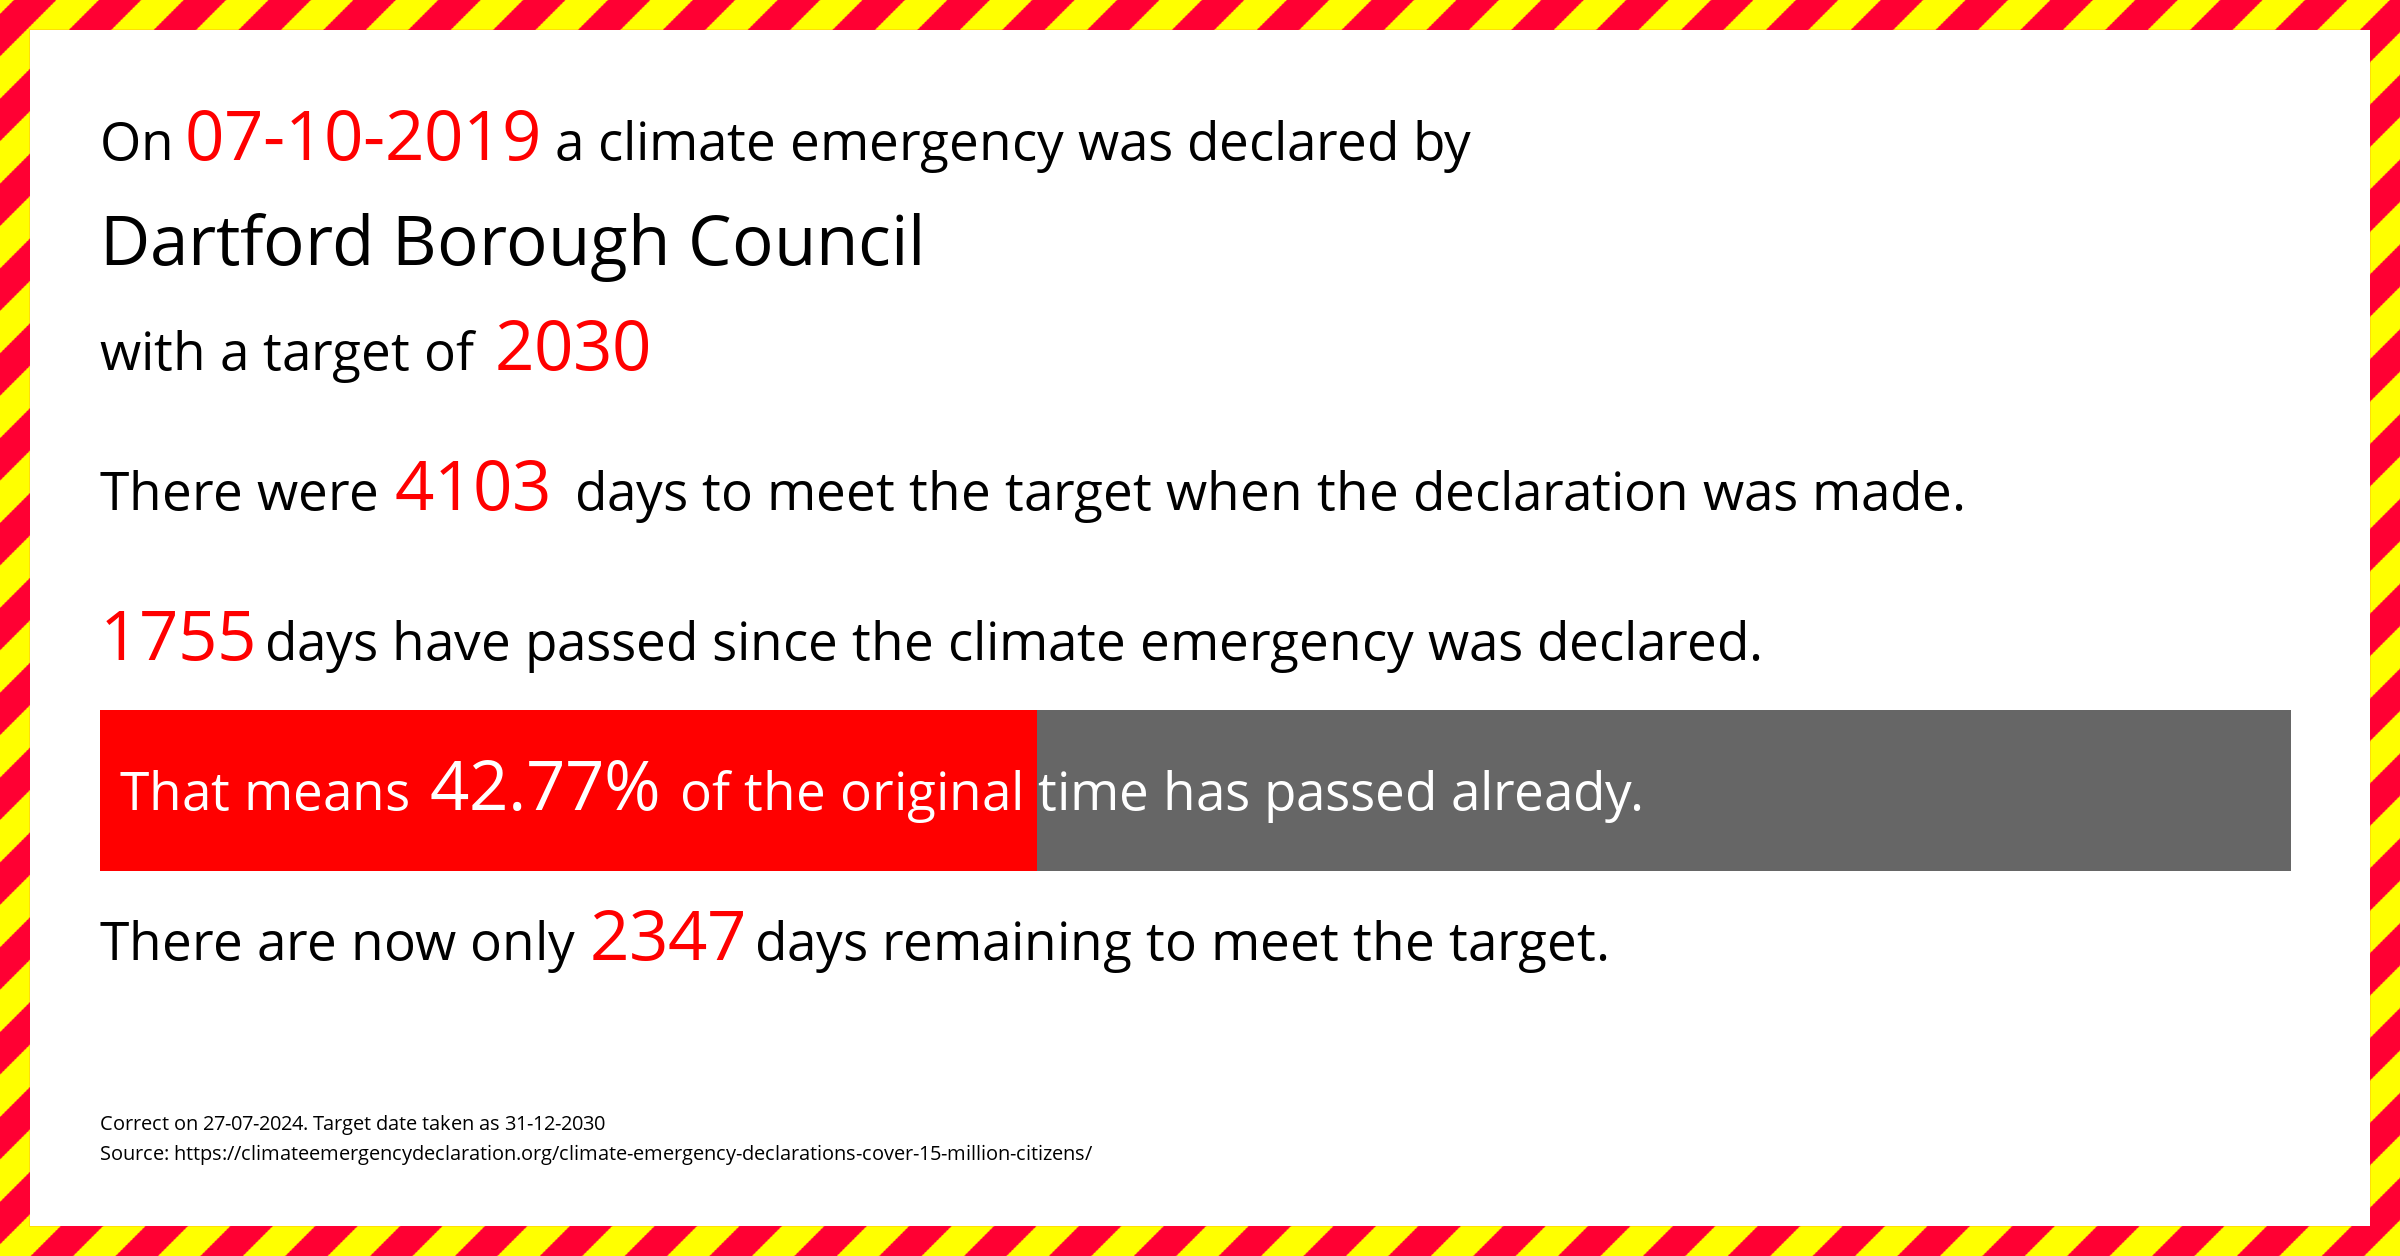 Dartford Borough Council declared a Climate emergency on Monday 7th October 2019, with a target of 2030.